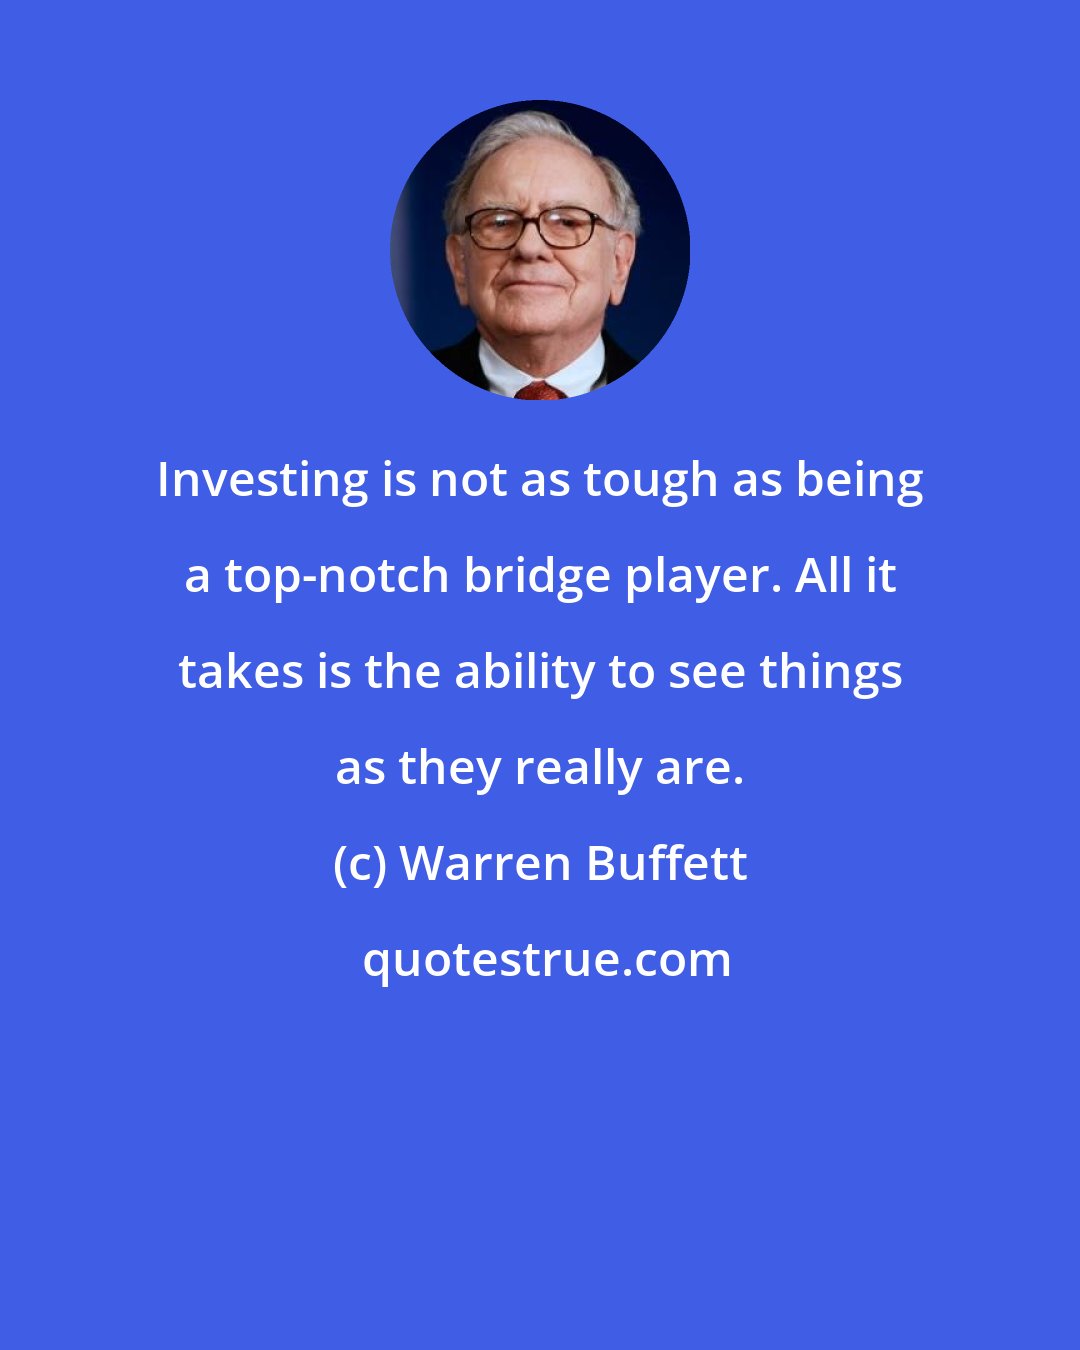 Warren Buffett: Investing is not as tough as being a top-notch bridge player. All it takes is the ability to see things as they really are.